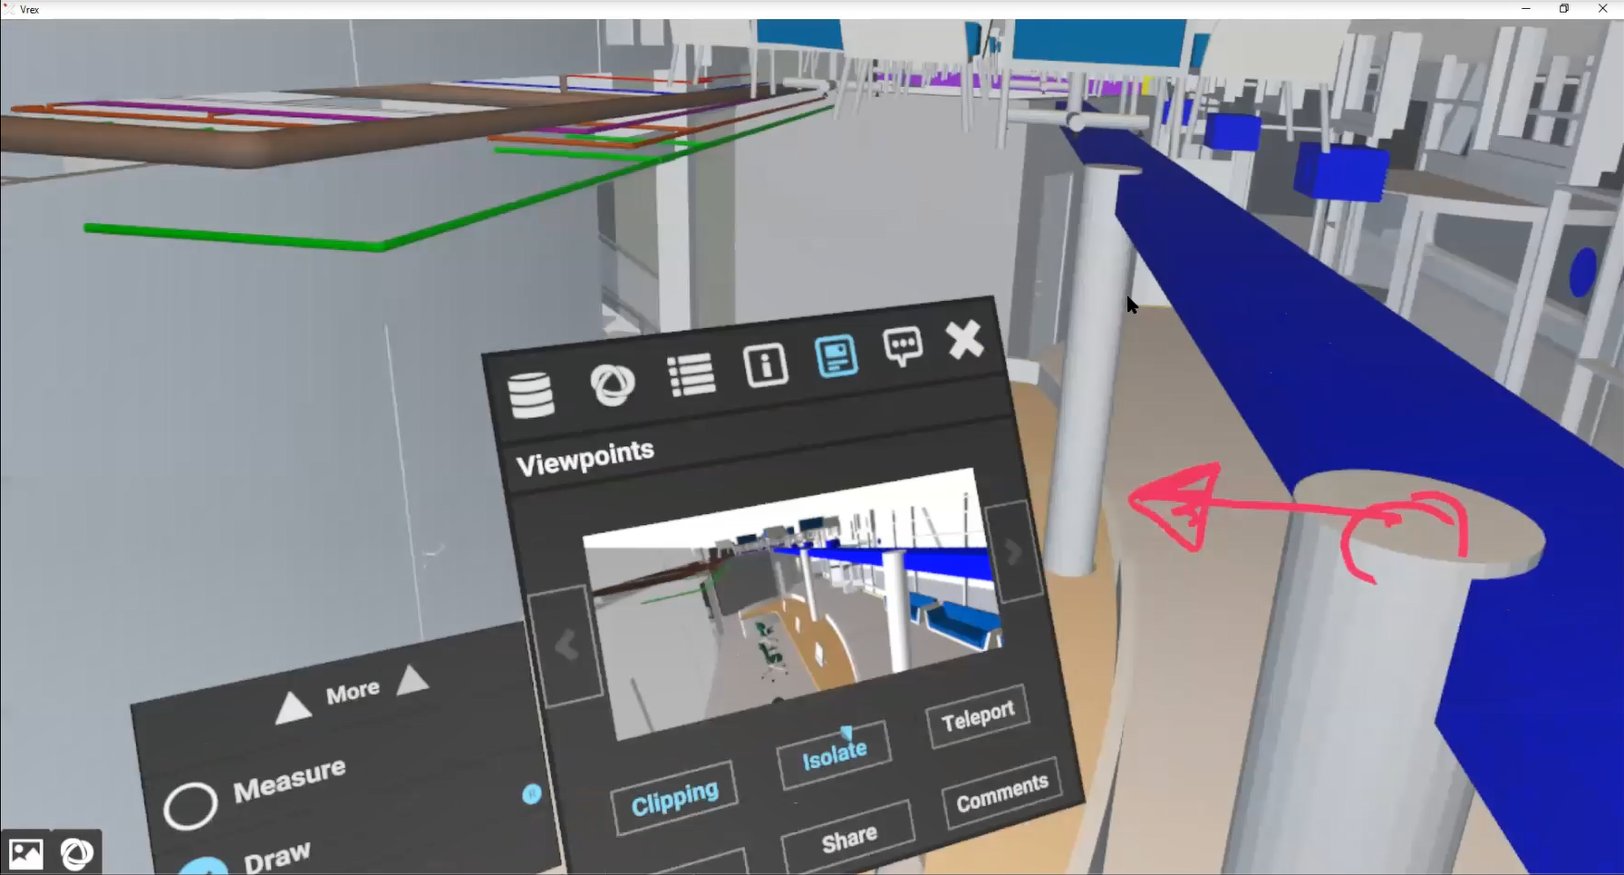 View, markup, and create new issues in VR with the Vrex + BIM Track integration